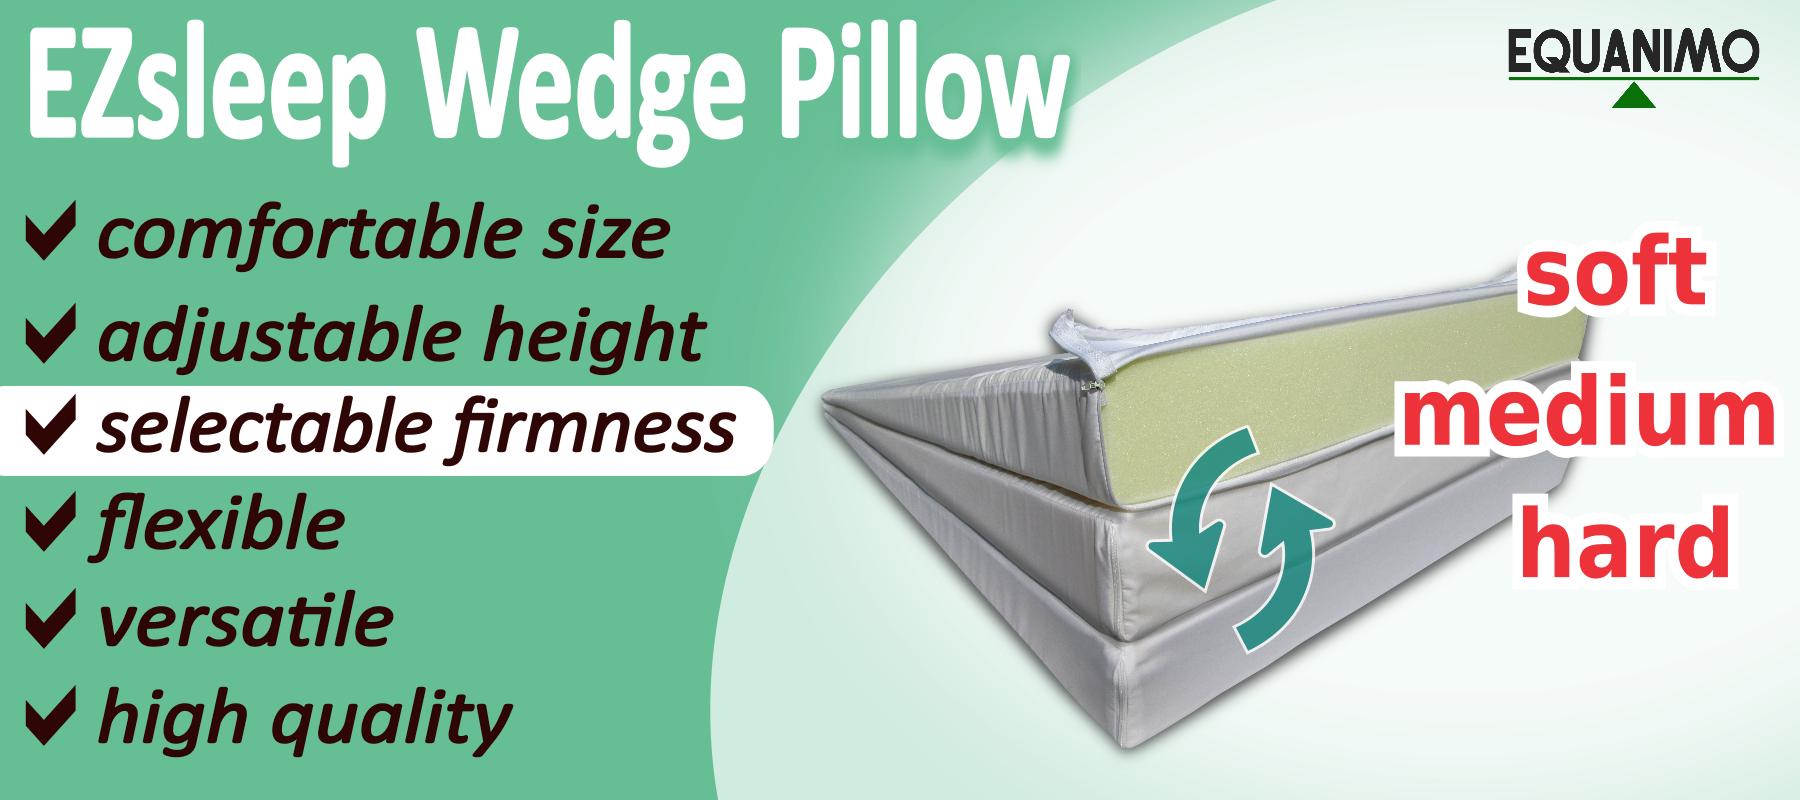 EZsleep Wedge Pillow has multiple foam layers with different foam grades (soft, medium, and firm). The user can simply switch between the layers to choose the preferred foam support